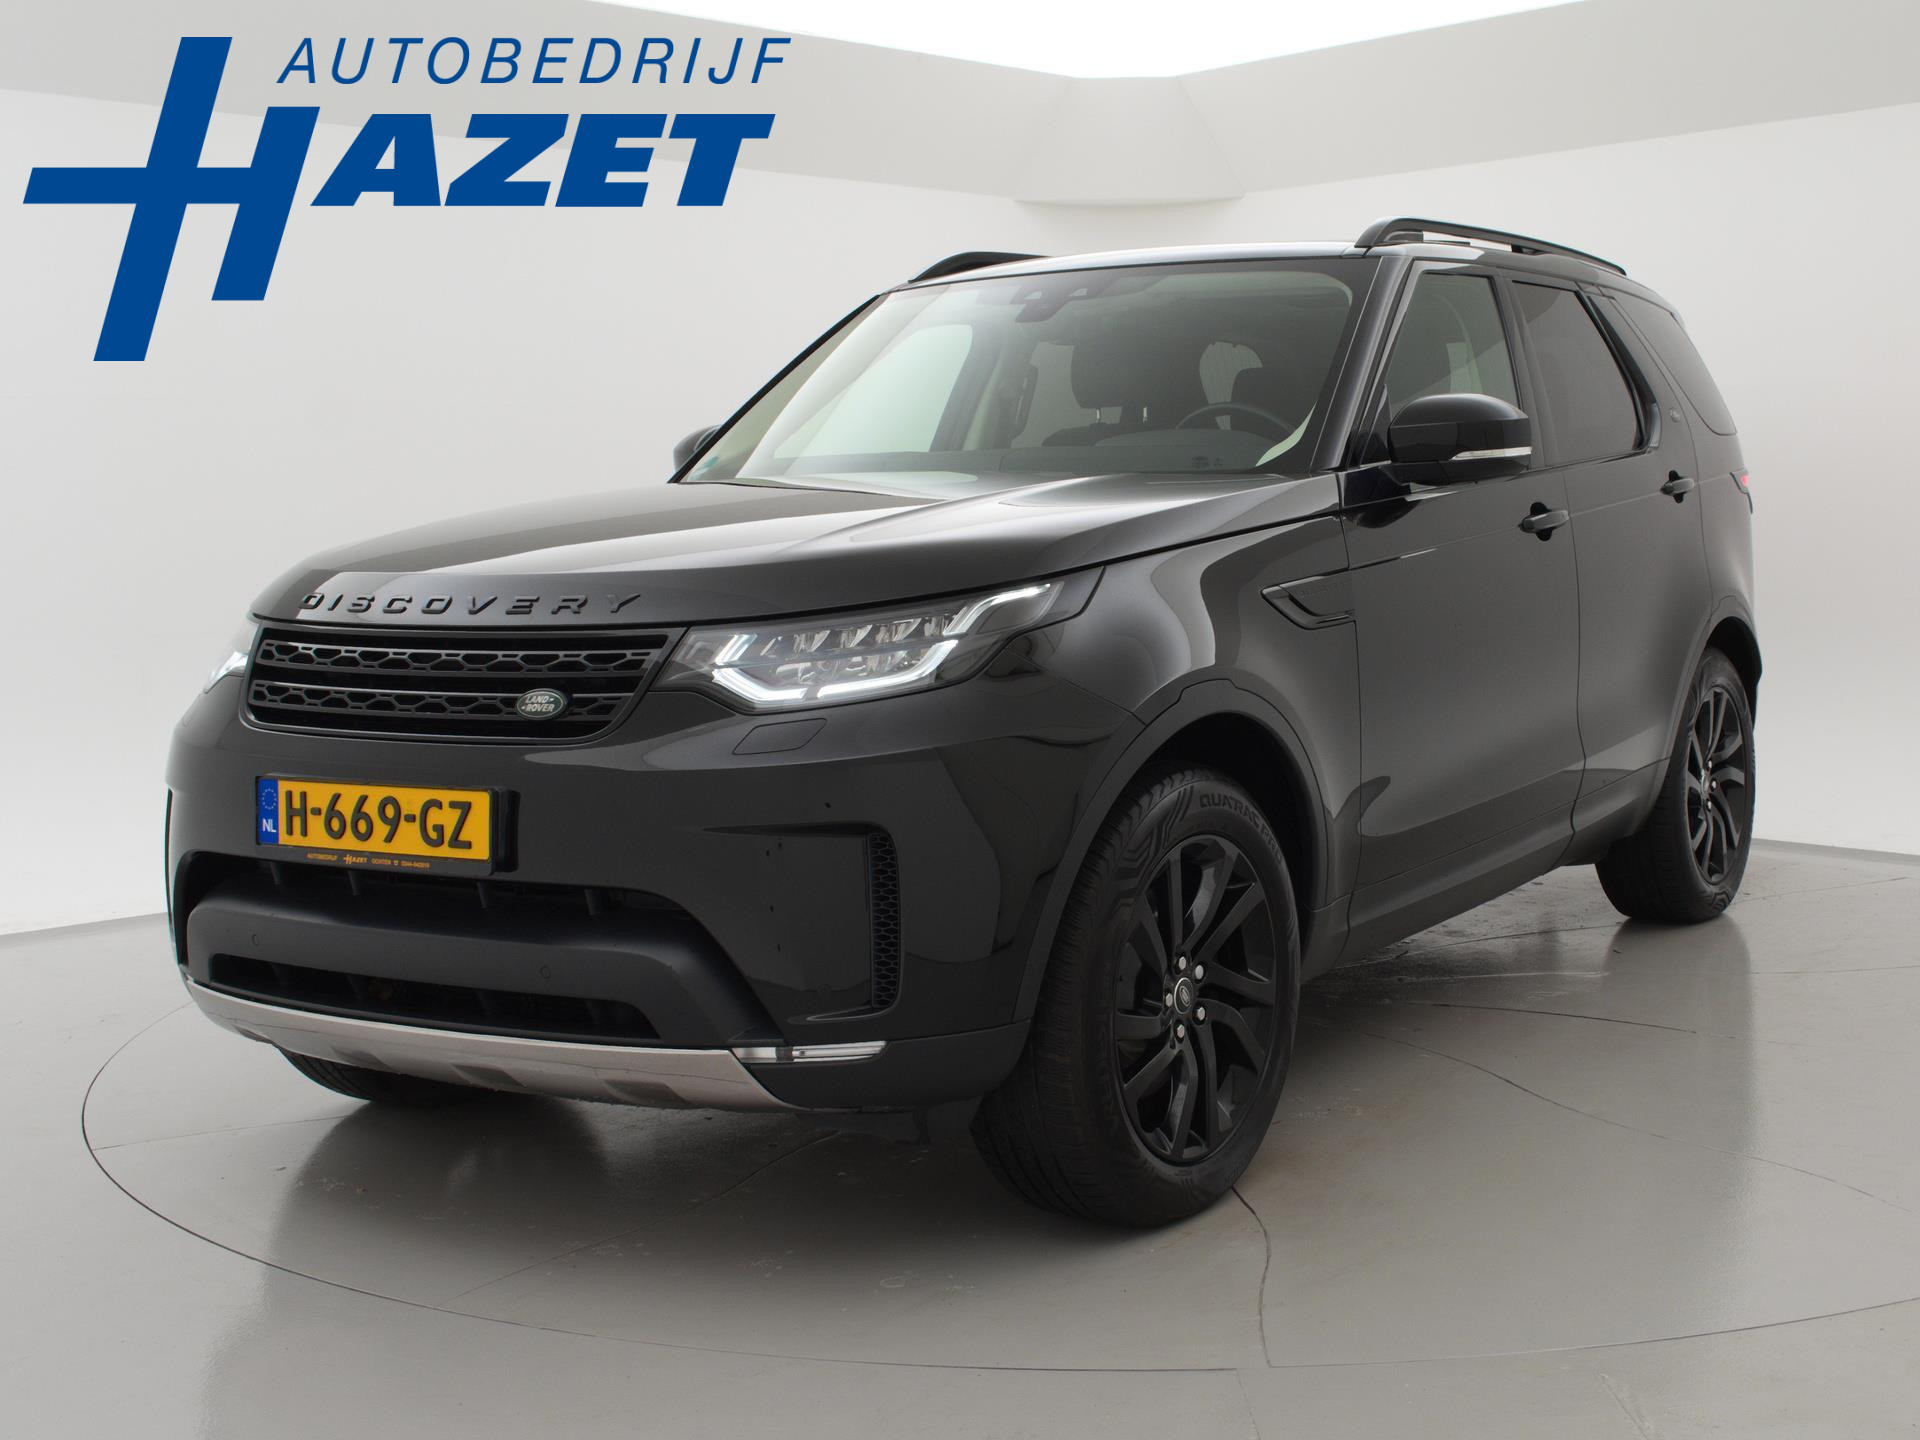 Land Rover Discovery 3.0 Si6 V6 340 PK 7-PERS. HSE LUXURY + PANORAMA / KOELKAST / TREKHAAK / DAB+ / LED / CAMERA bij viaBOVAG.nl